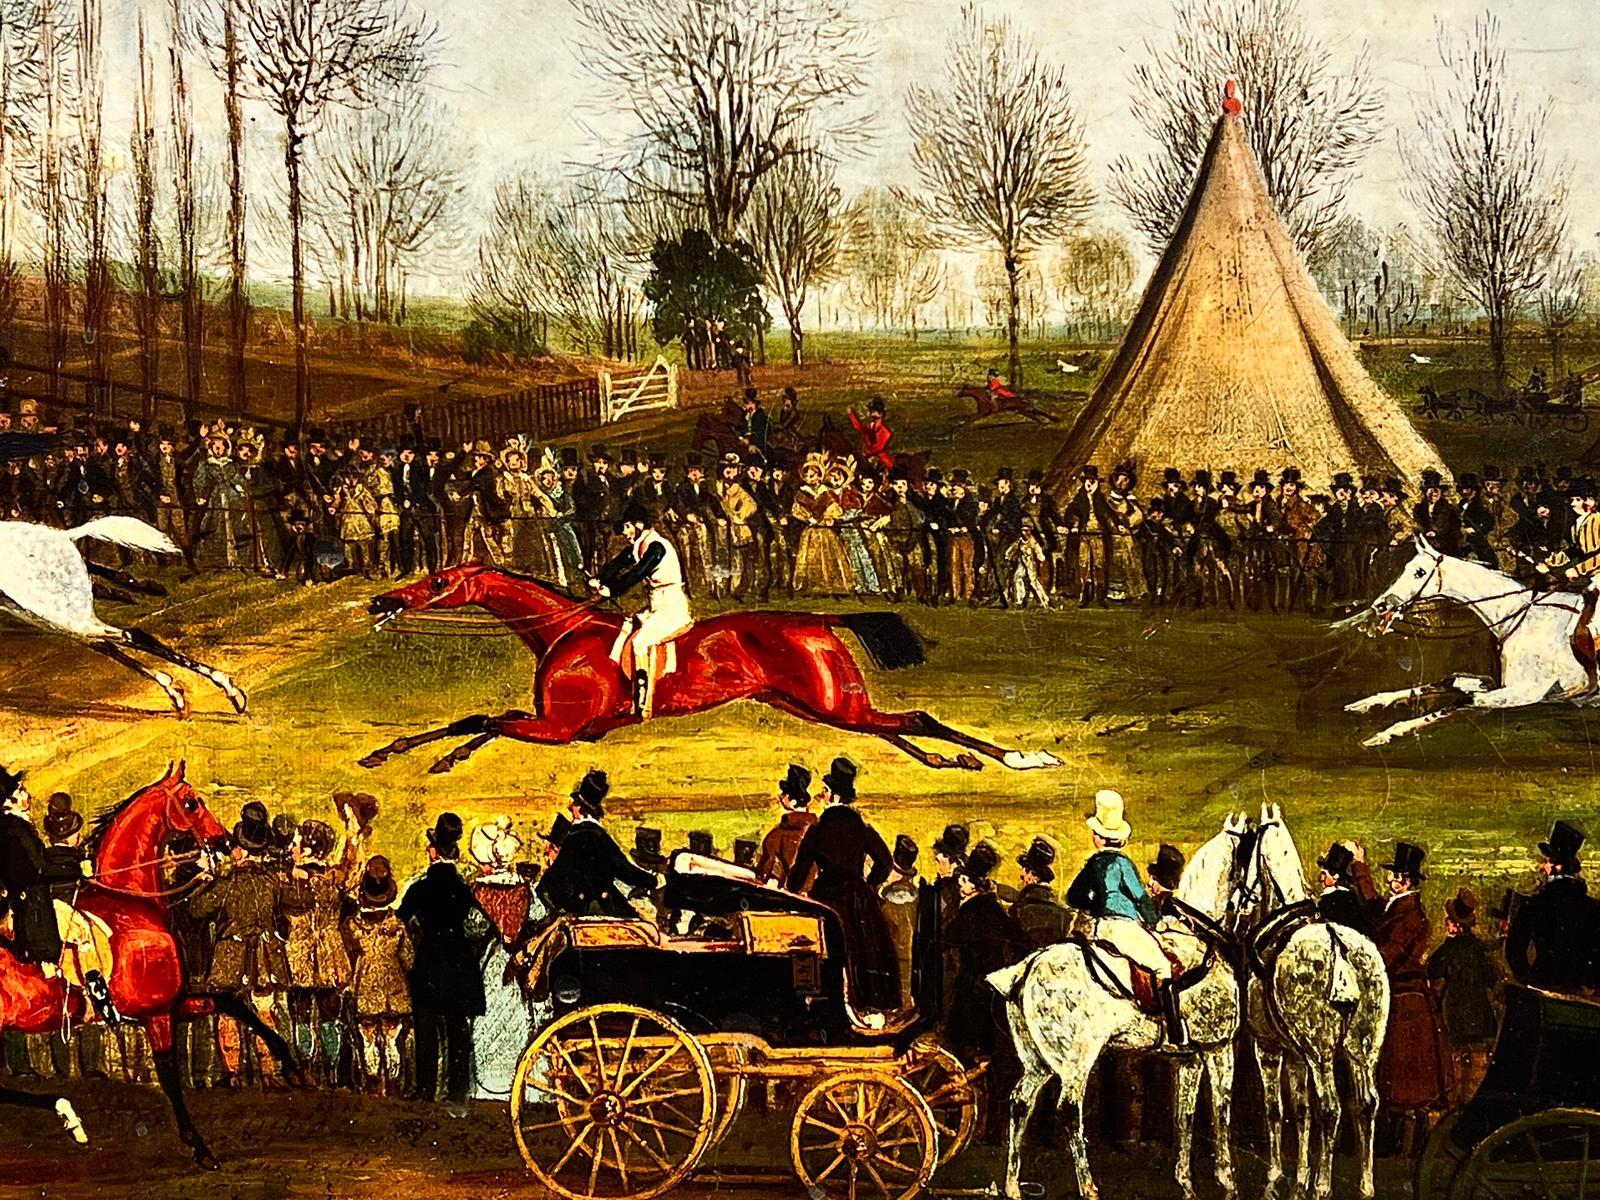 The Great St. Albans Steeplechase
The Finish
after James Pollard
titled to label verso
color print on canvas, framed
canvas: 25.5 x 37 inches
framed: 31 x 41 inches
the painting is in overall very good and sound condition - has small signs of paint